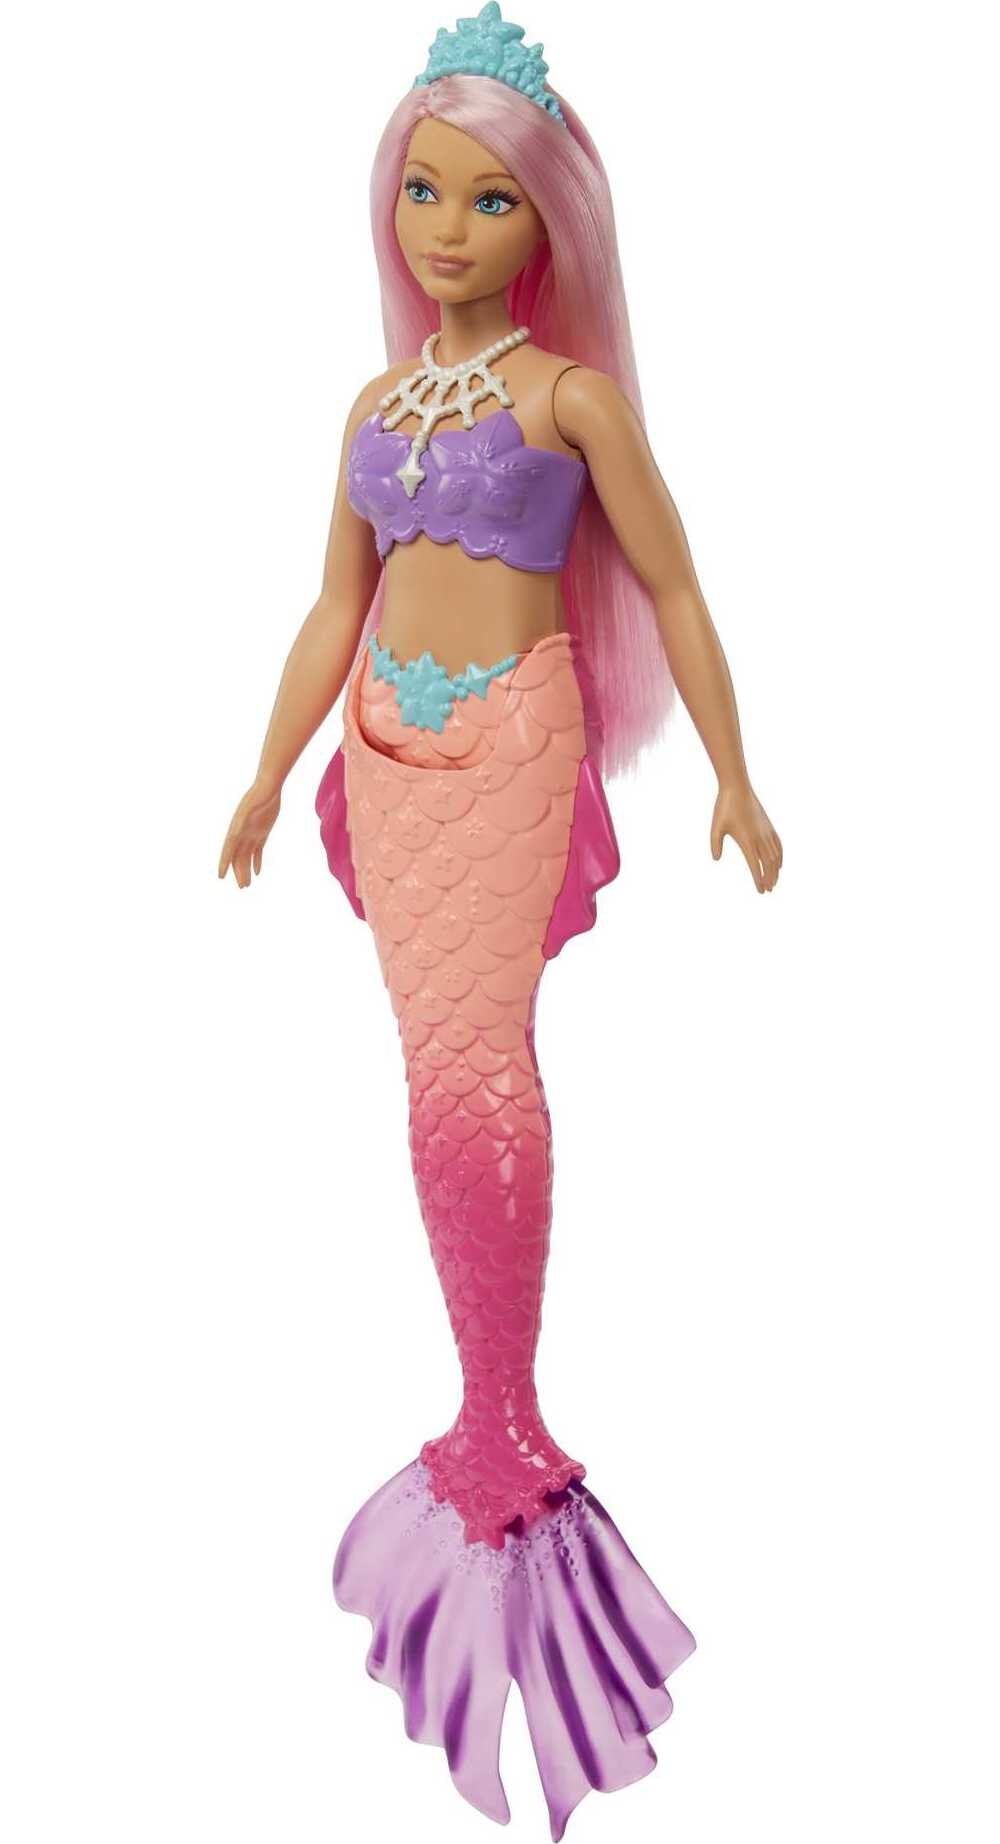 Barbie Dreamtopia Mermaid Doll (Curvy, Pink Hair), Toy for 3 Years and Up